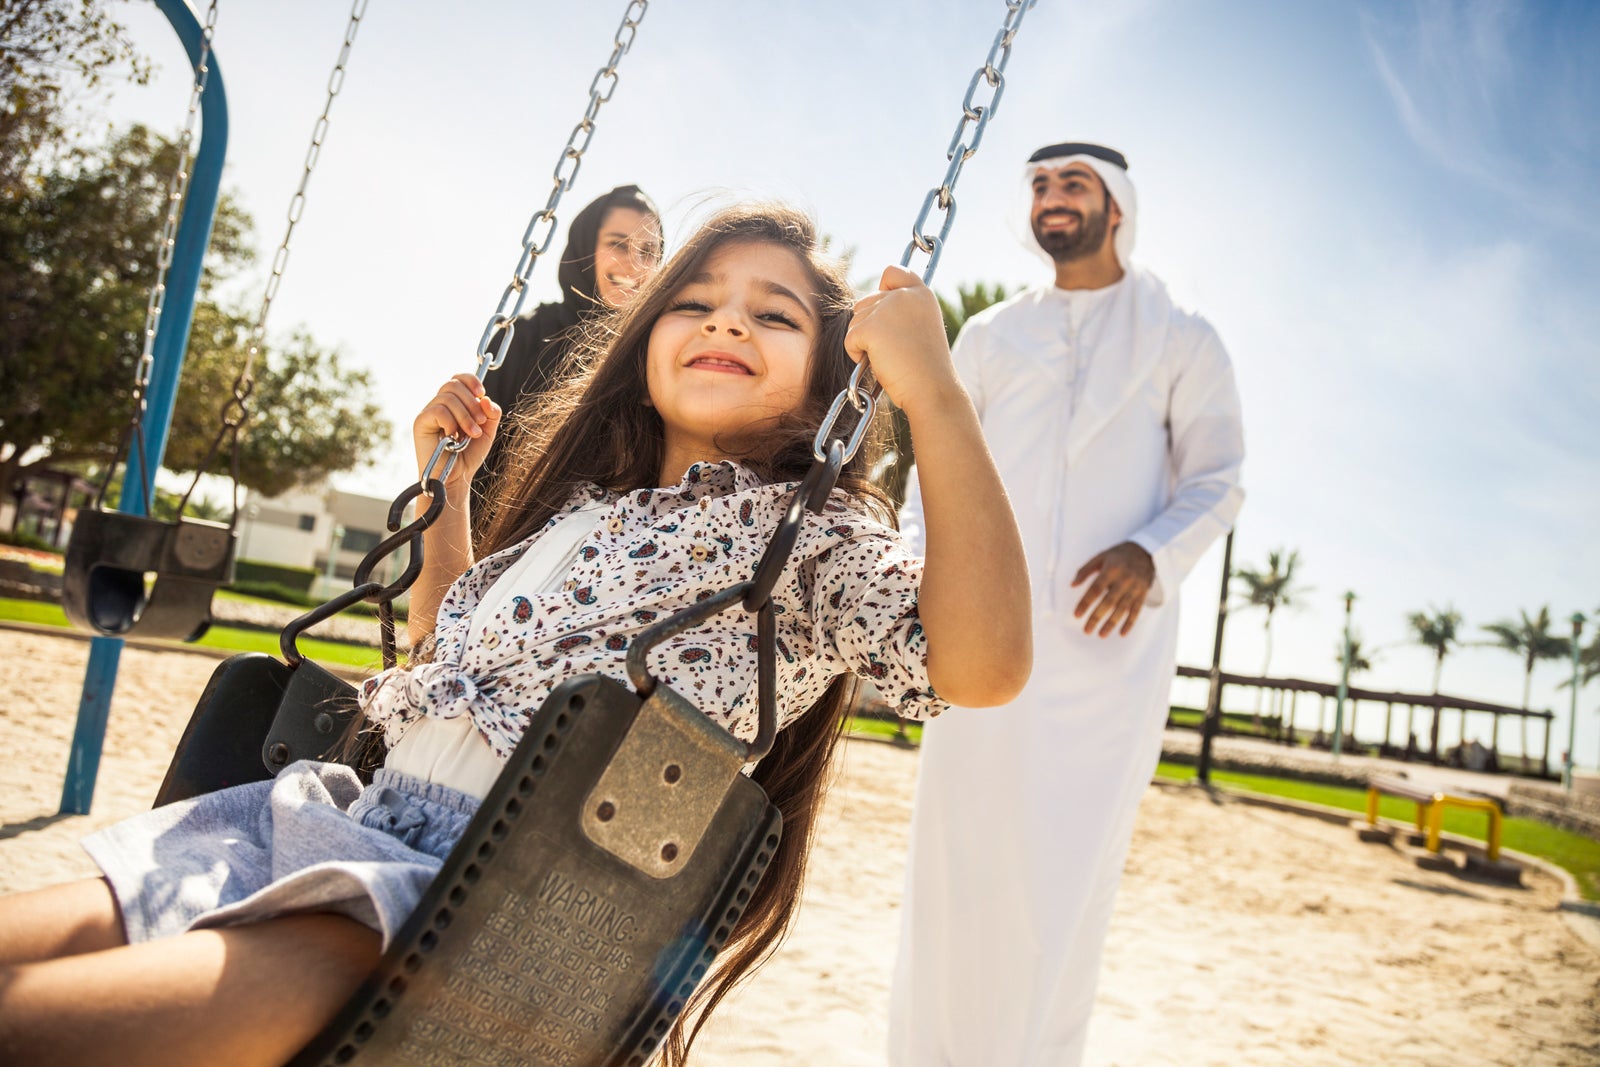 Parents push a child on a swing